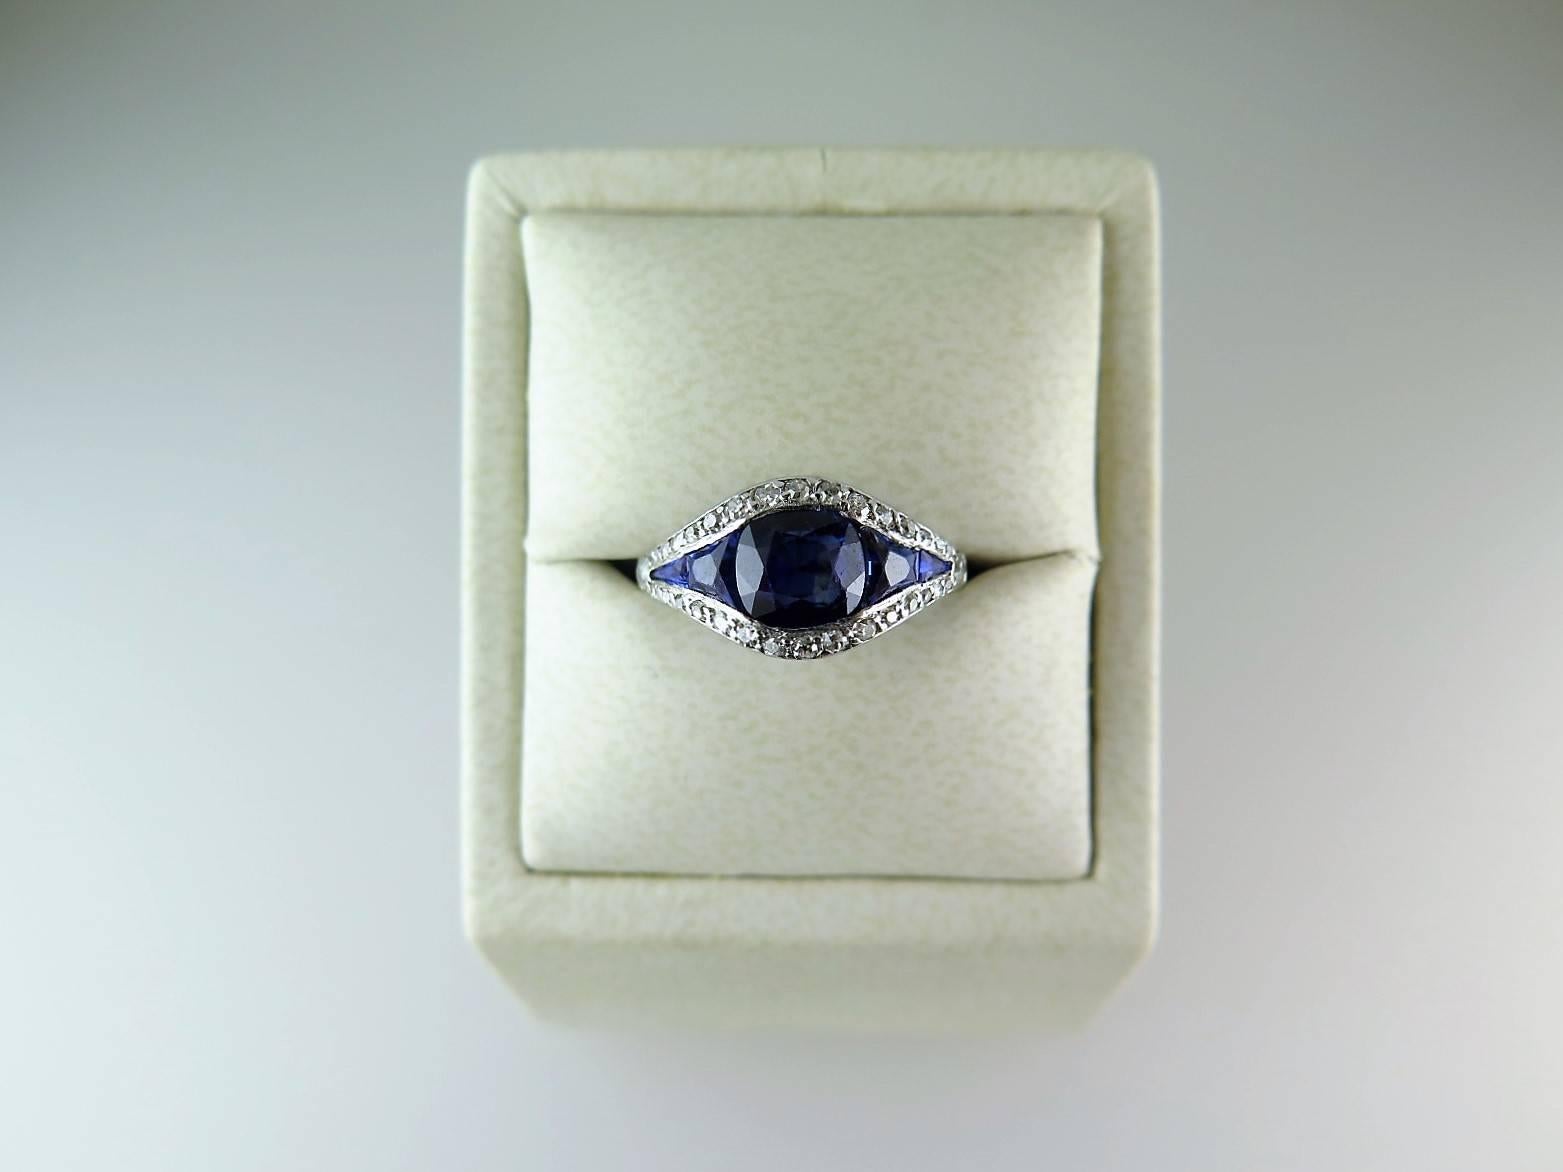 The central cushion-shaped sapphire calculated to weigh approx. 1.25cts with calibré-cut sapphire shoulders, edged in single and old mine-cut diamonds to the plain platinum mount, size M (US size 6 1/2). Can be resized to order.